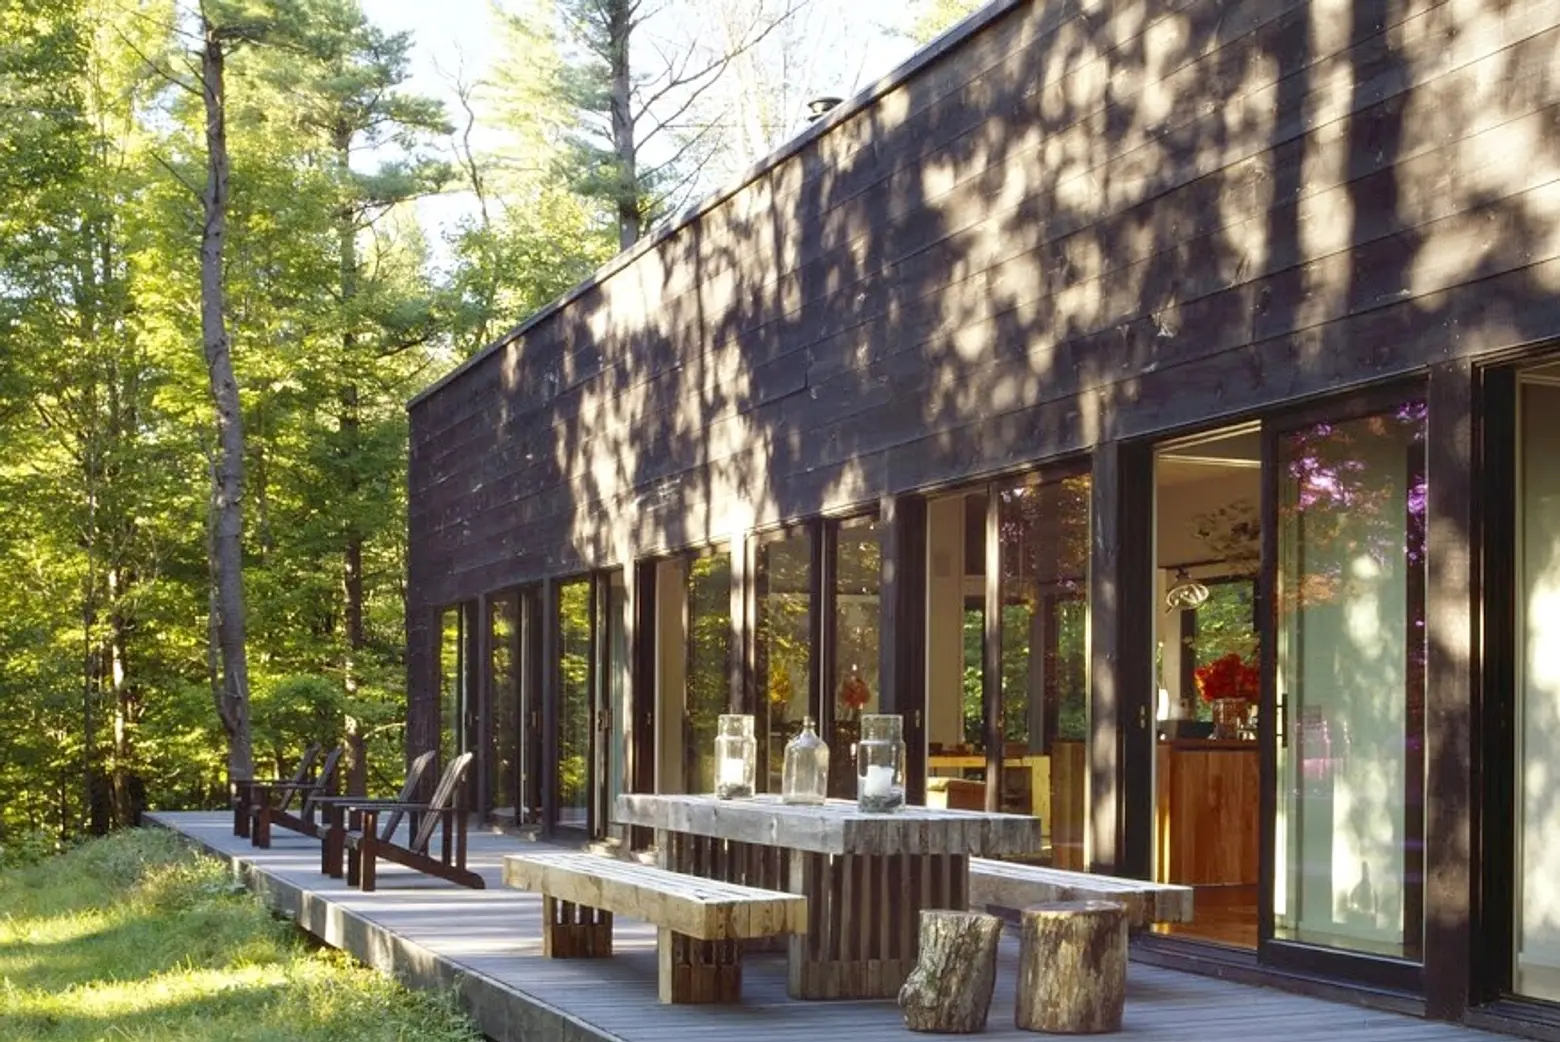 Vacation at a Glass Cabin in the Woods of Upstate New York for $300/Night